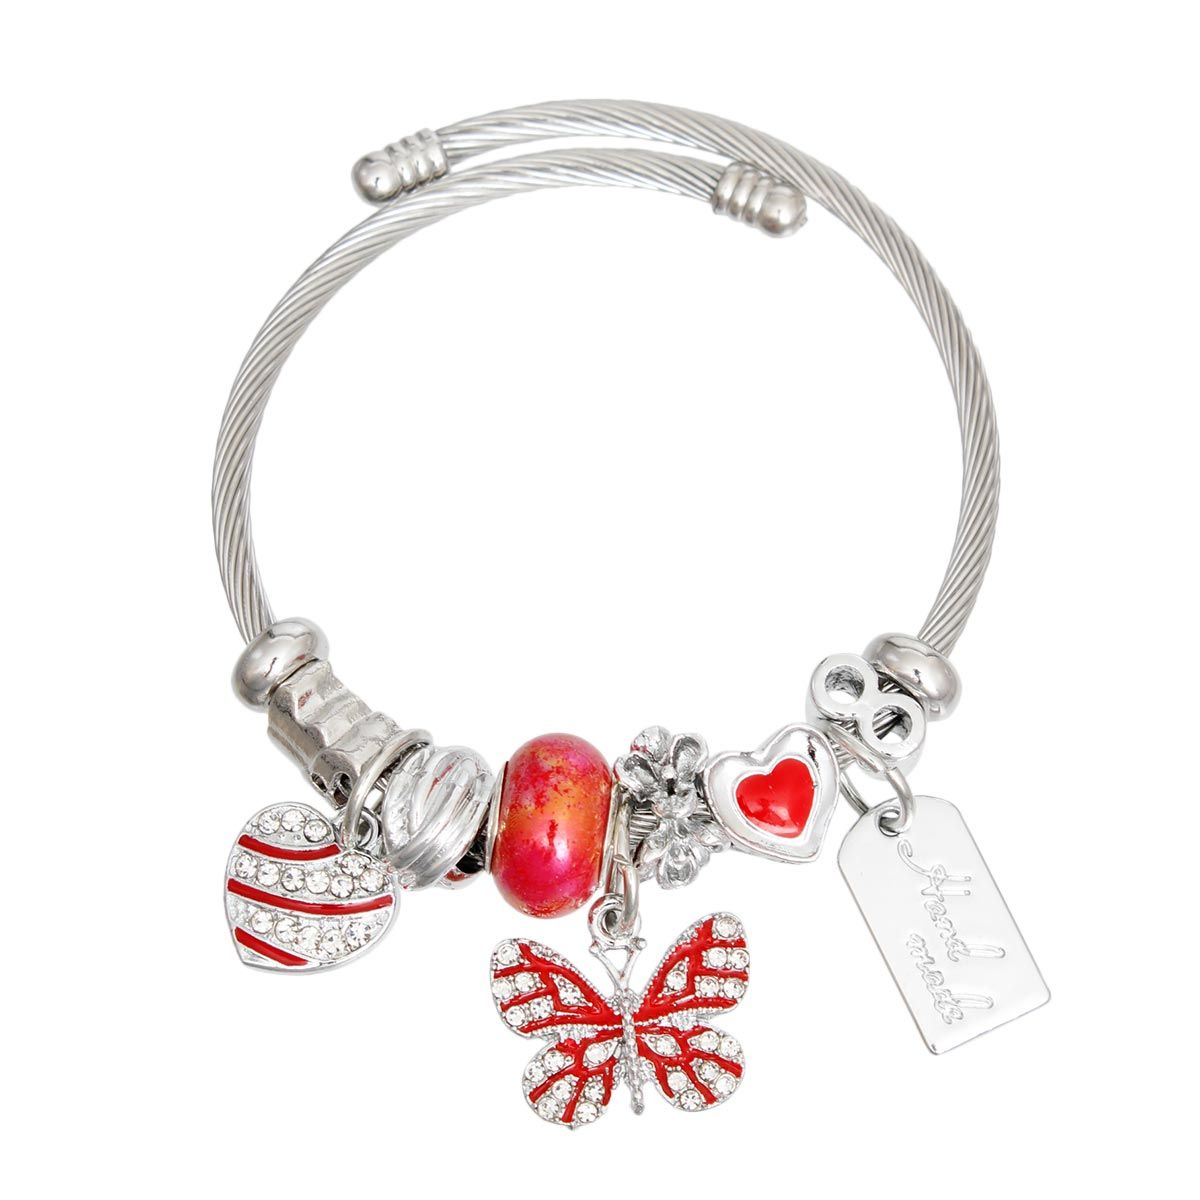 Cable Bangle Red Butterfly Bracelet for Women